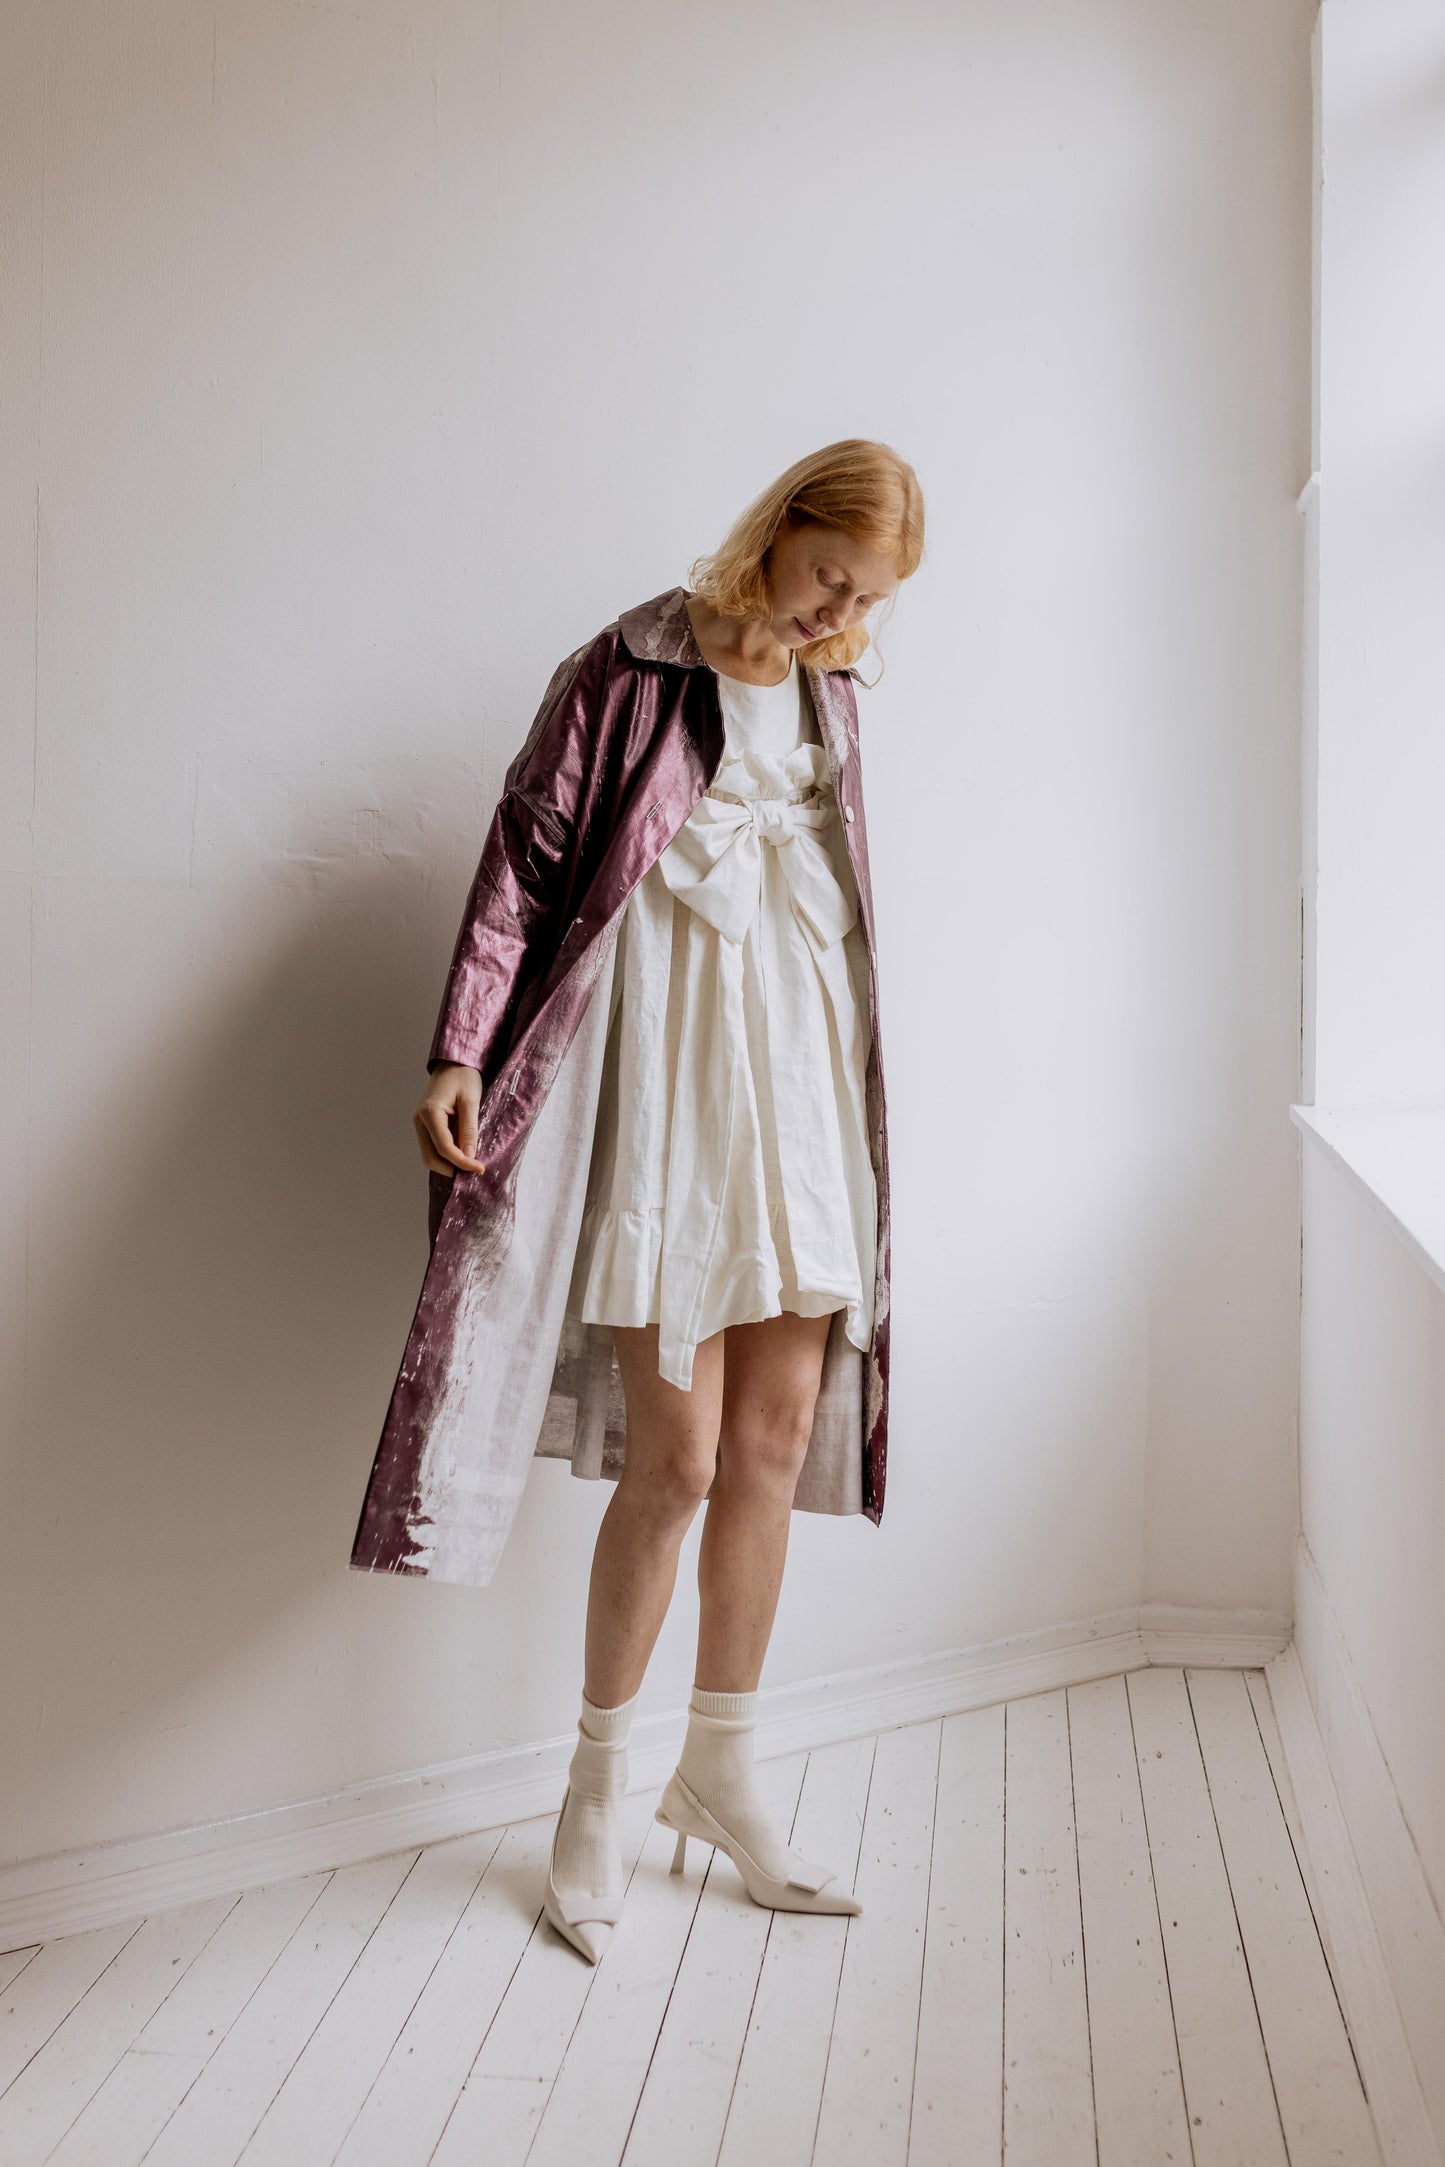 MINI BOW DRESS - PEARL | A new shape for AW23, The Bow Dress is one of our most playful. The dress is an oversized shape with gathered tiered details. The frill and bow detail at the front is the show-stopper. Cut in an oversized shape - you can wear her